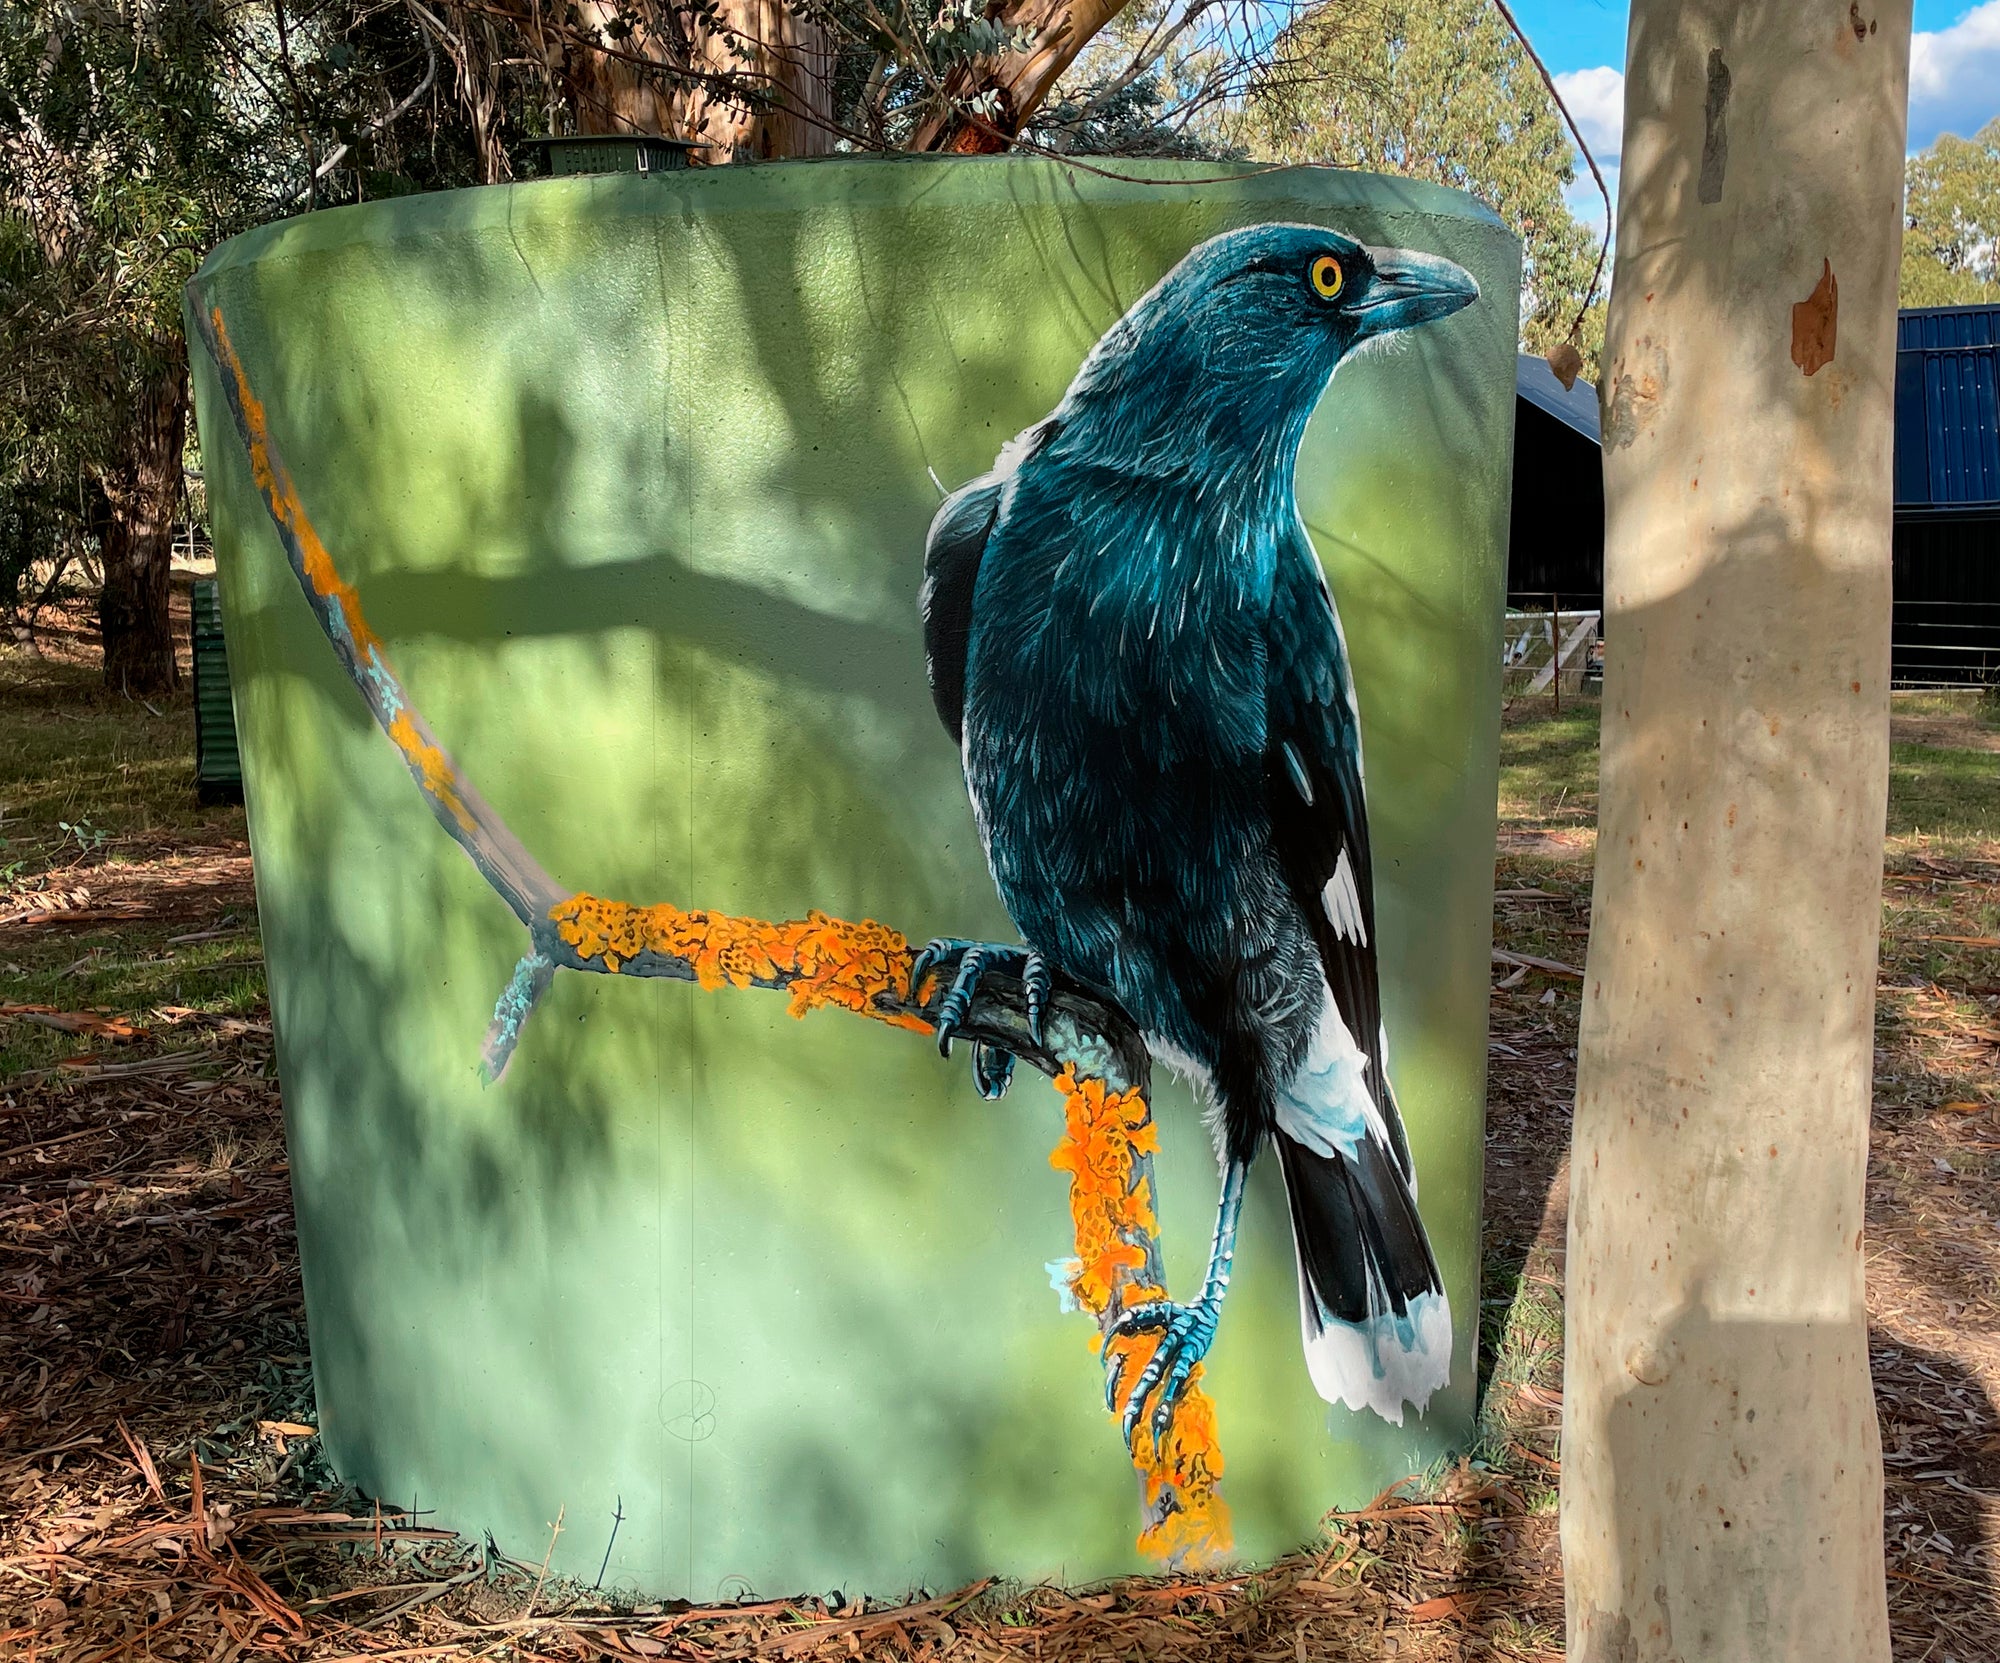 painted mural of a pair of birds perched on lichen covered branch. painted on a water tank by artist Geoffrey Carran